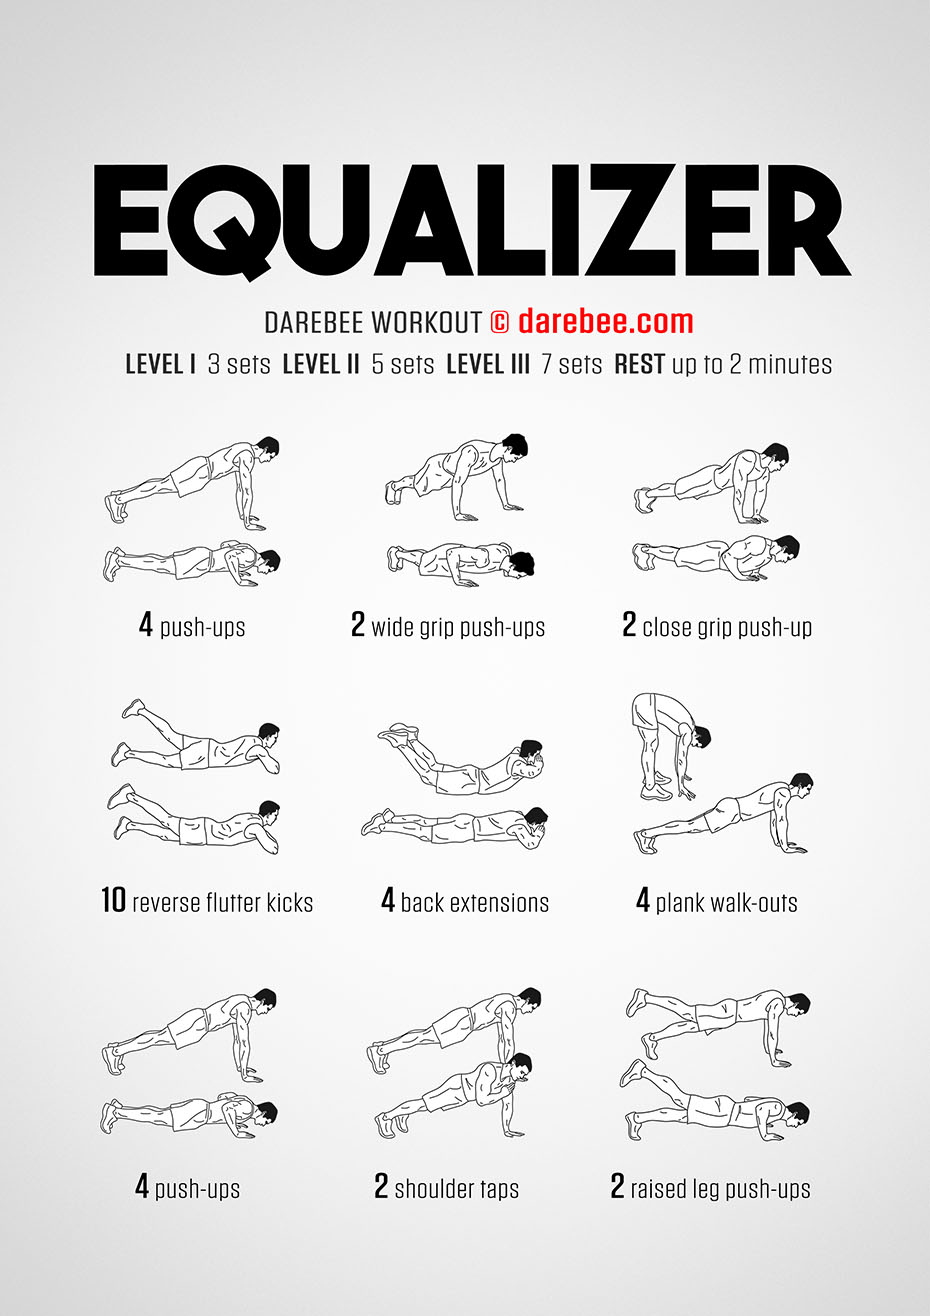 5 Day Chest workout darebee for Burn Fat fast